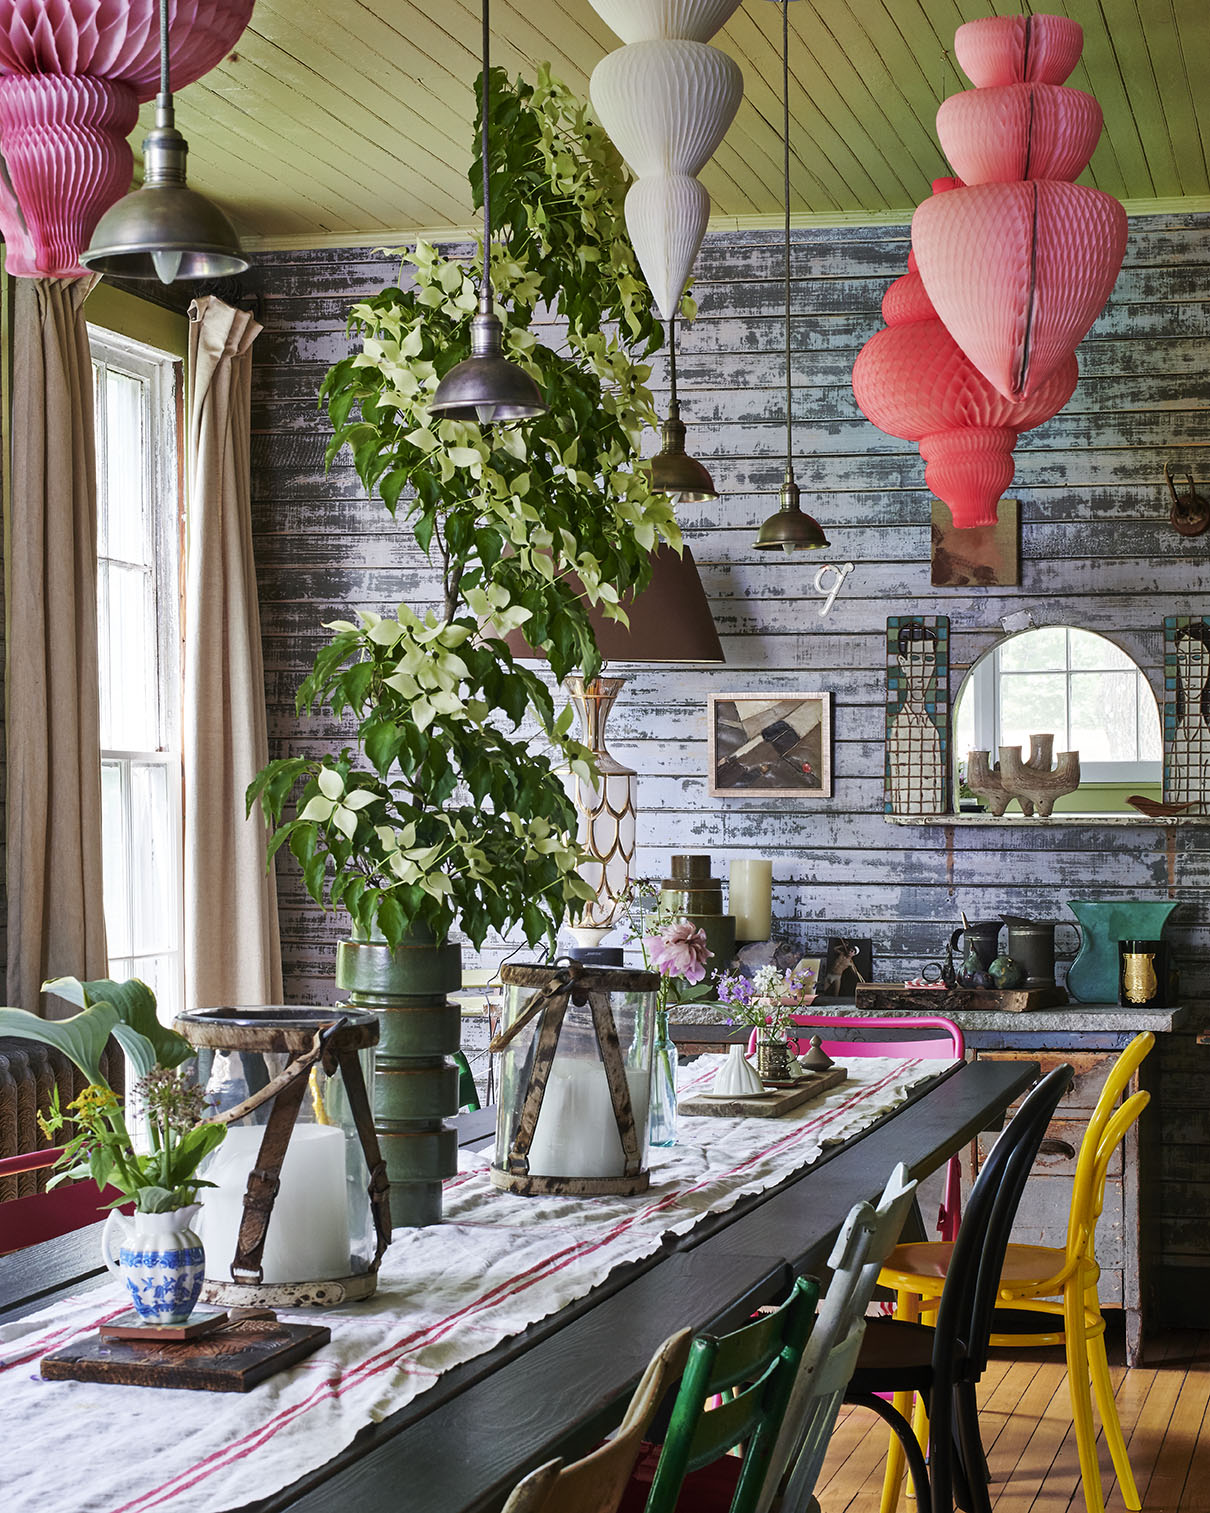 dining room table with decorations in MartinBourne Home by Alison Gootee Photography